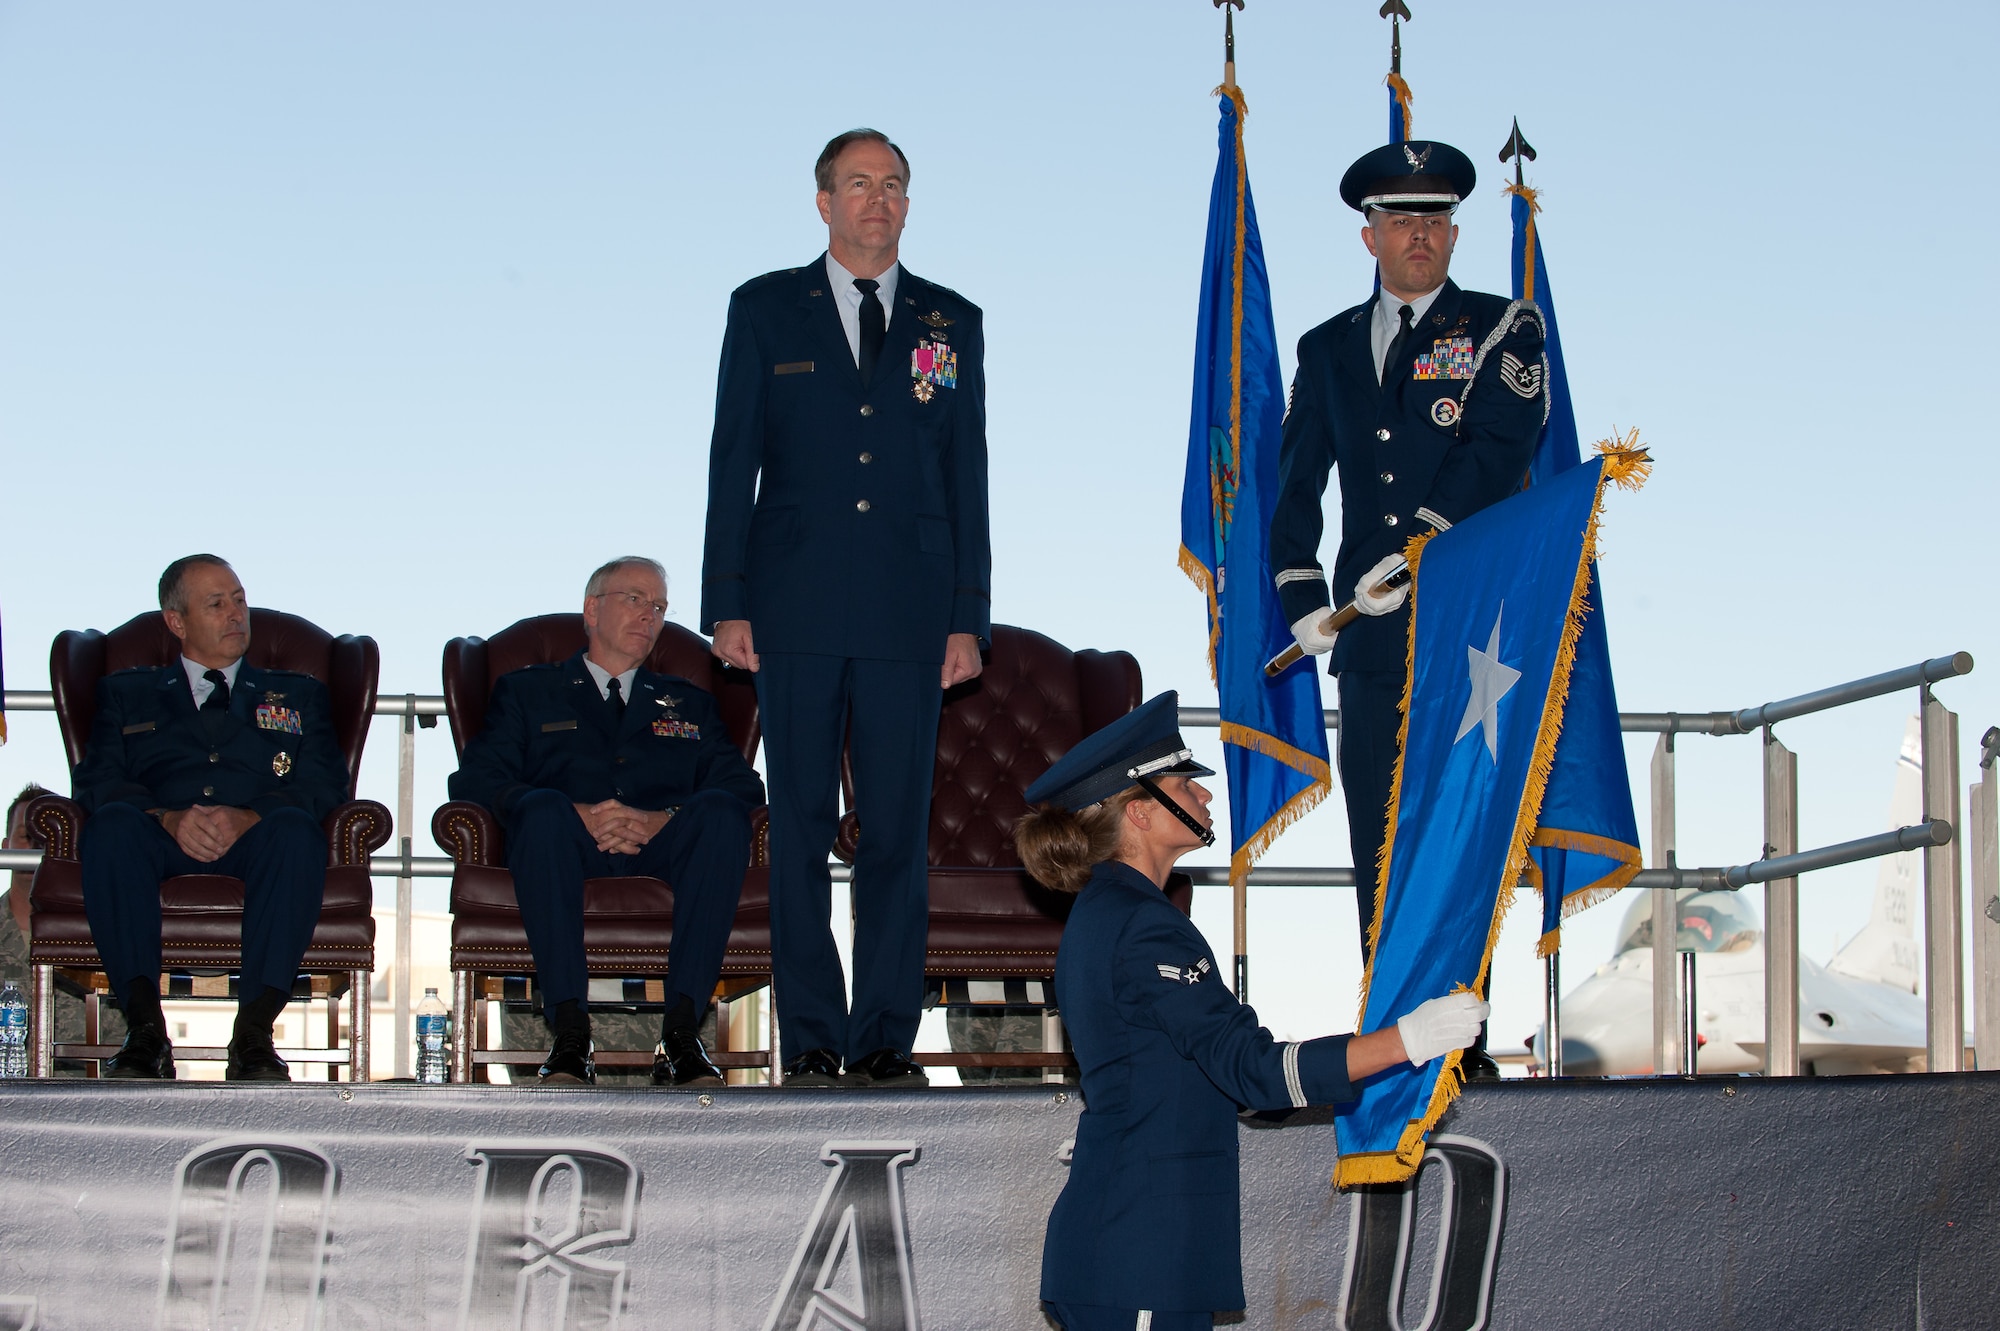 Brig. Gen. Richard L. Martin stands at attention as the 140th Wing Color Guard unfurls his one-star flag during Martin's promotion ceremony at Buckley Air Force Base, Colo., Sept. 10. Martin is assuming command of the Colorado Air National Guard and the position of Assistant Adjutant General - Air. (U.S. Air Force photo/Master Sgt. John Nimmo, Sr.) (RELEASED)